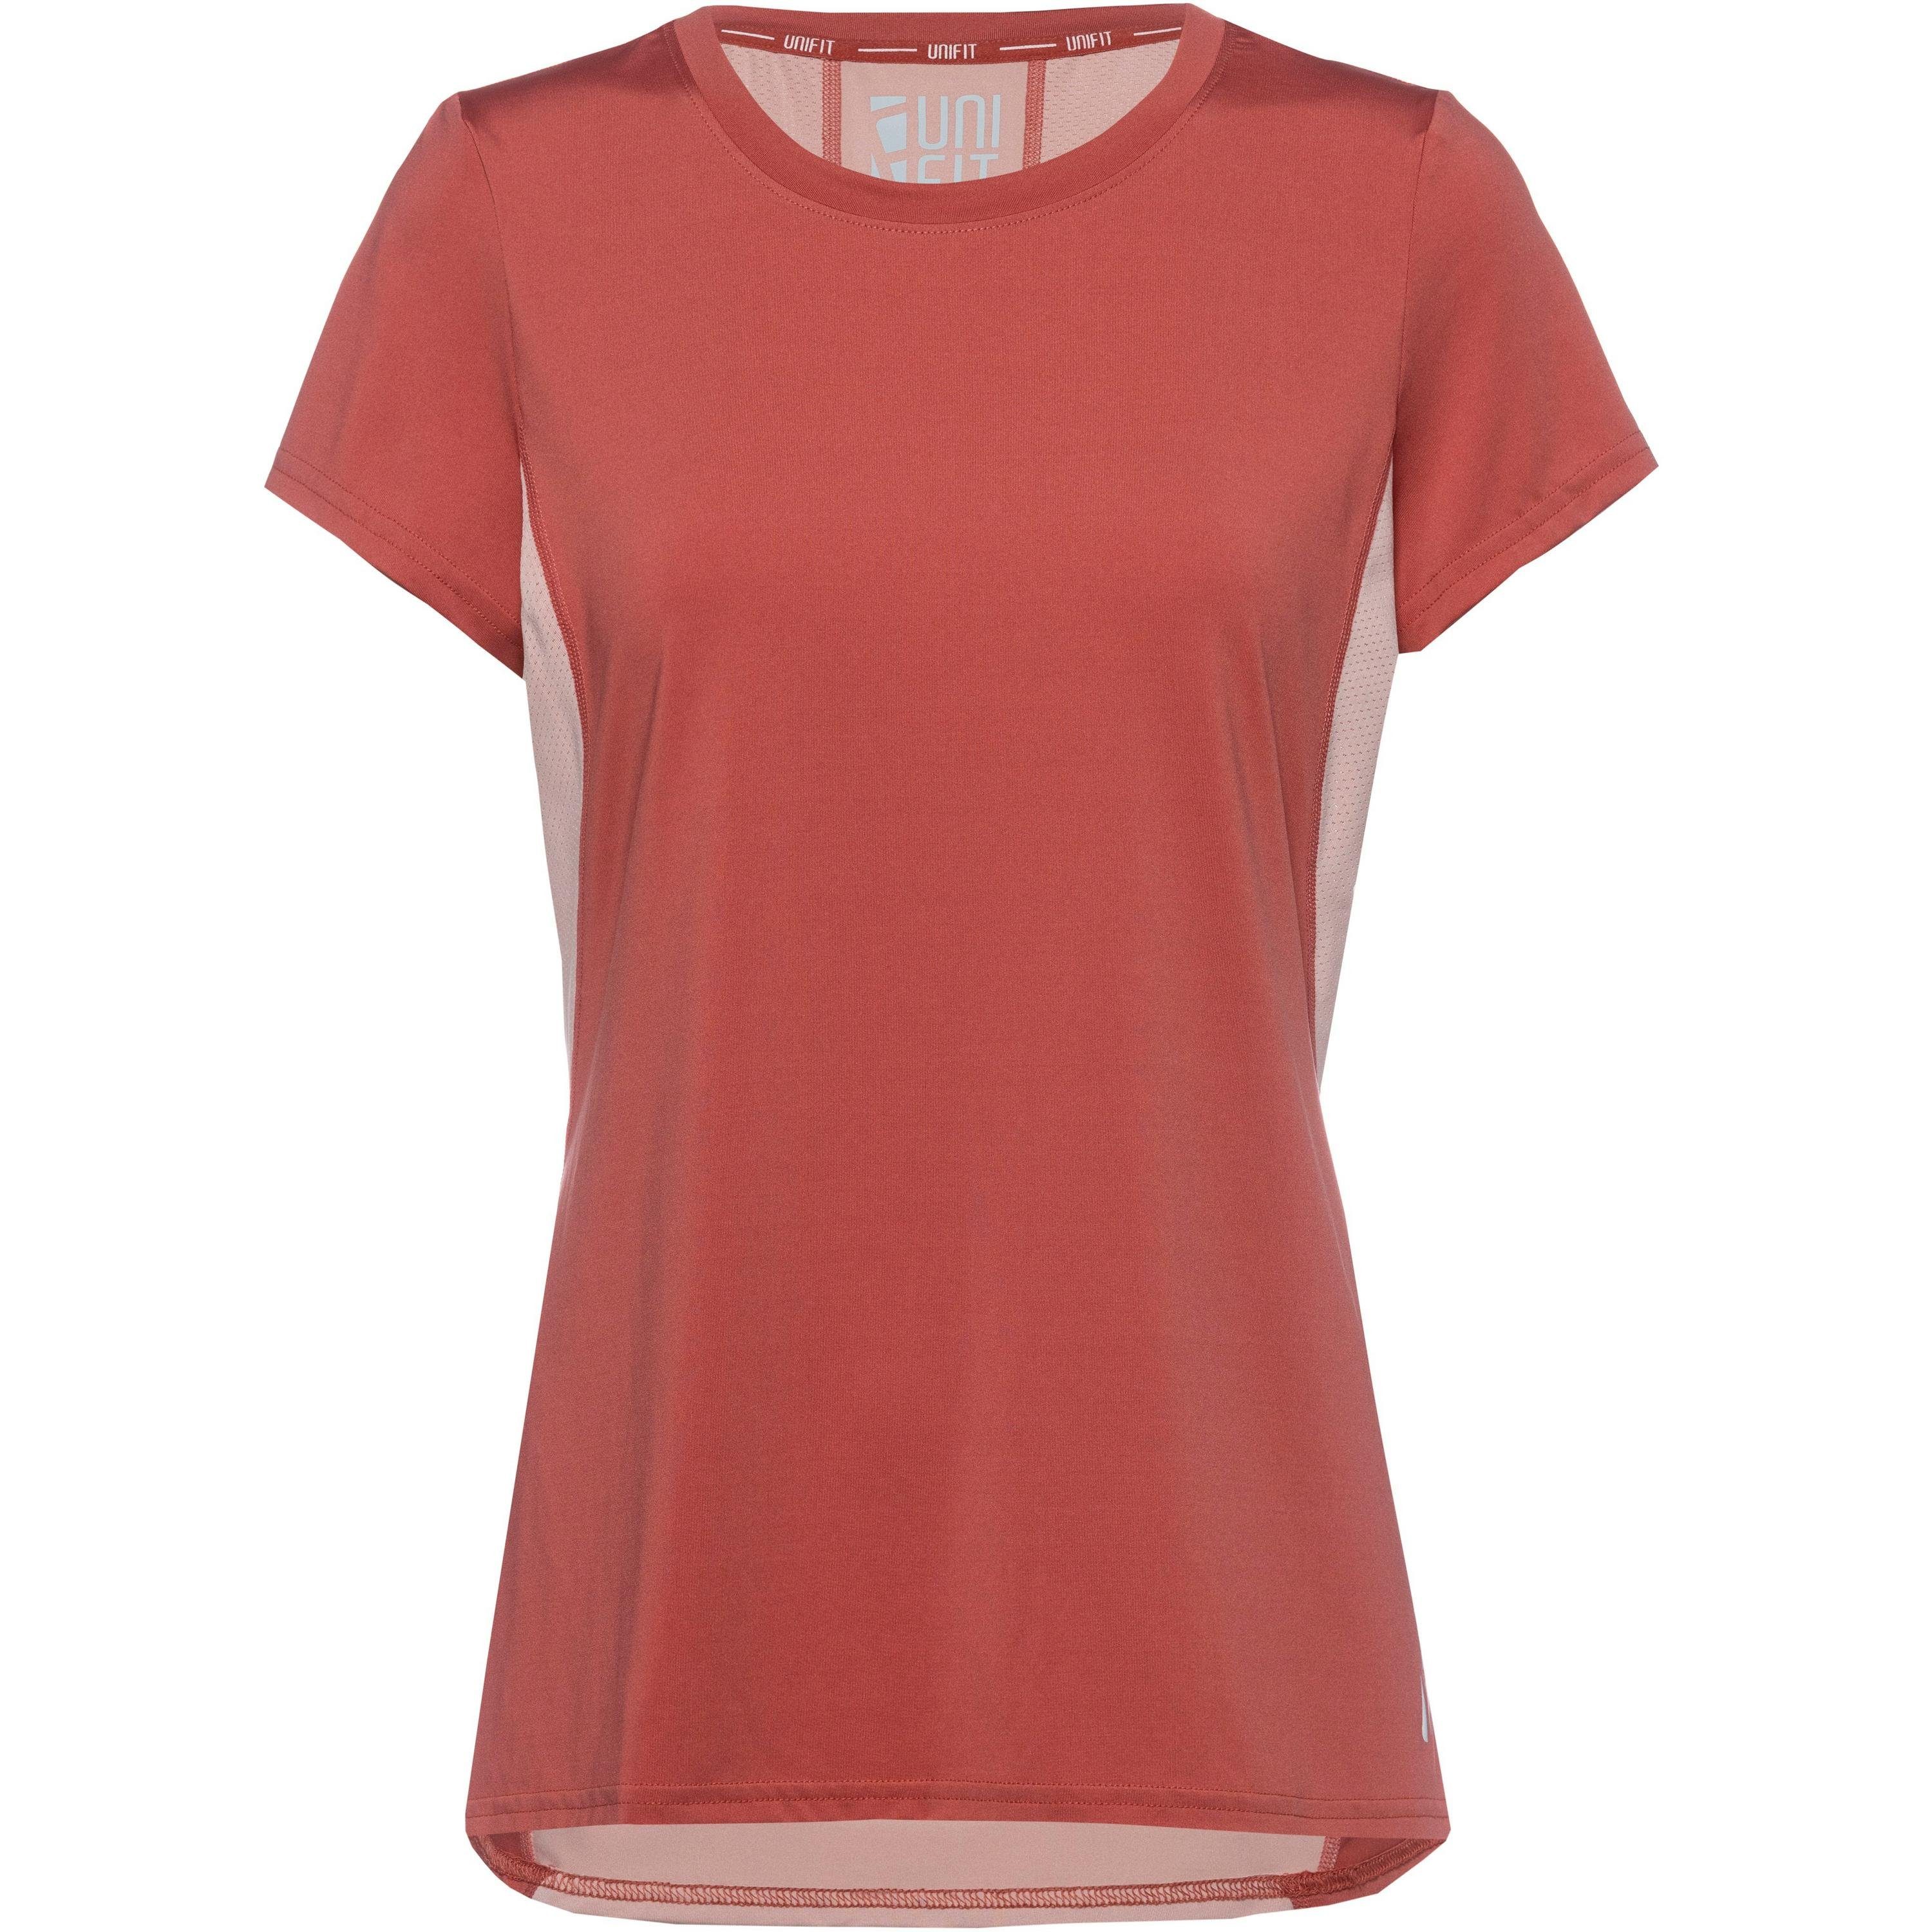 unifit Funktionsshirt red mineral